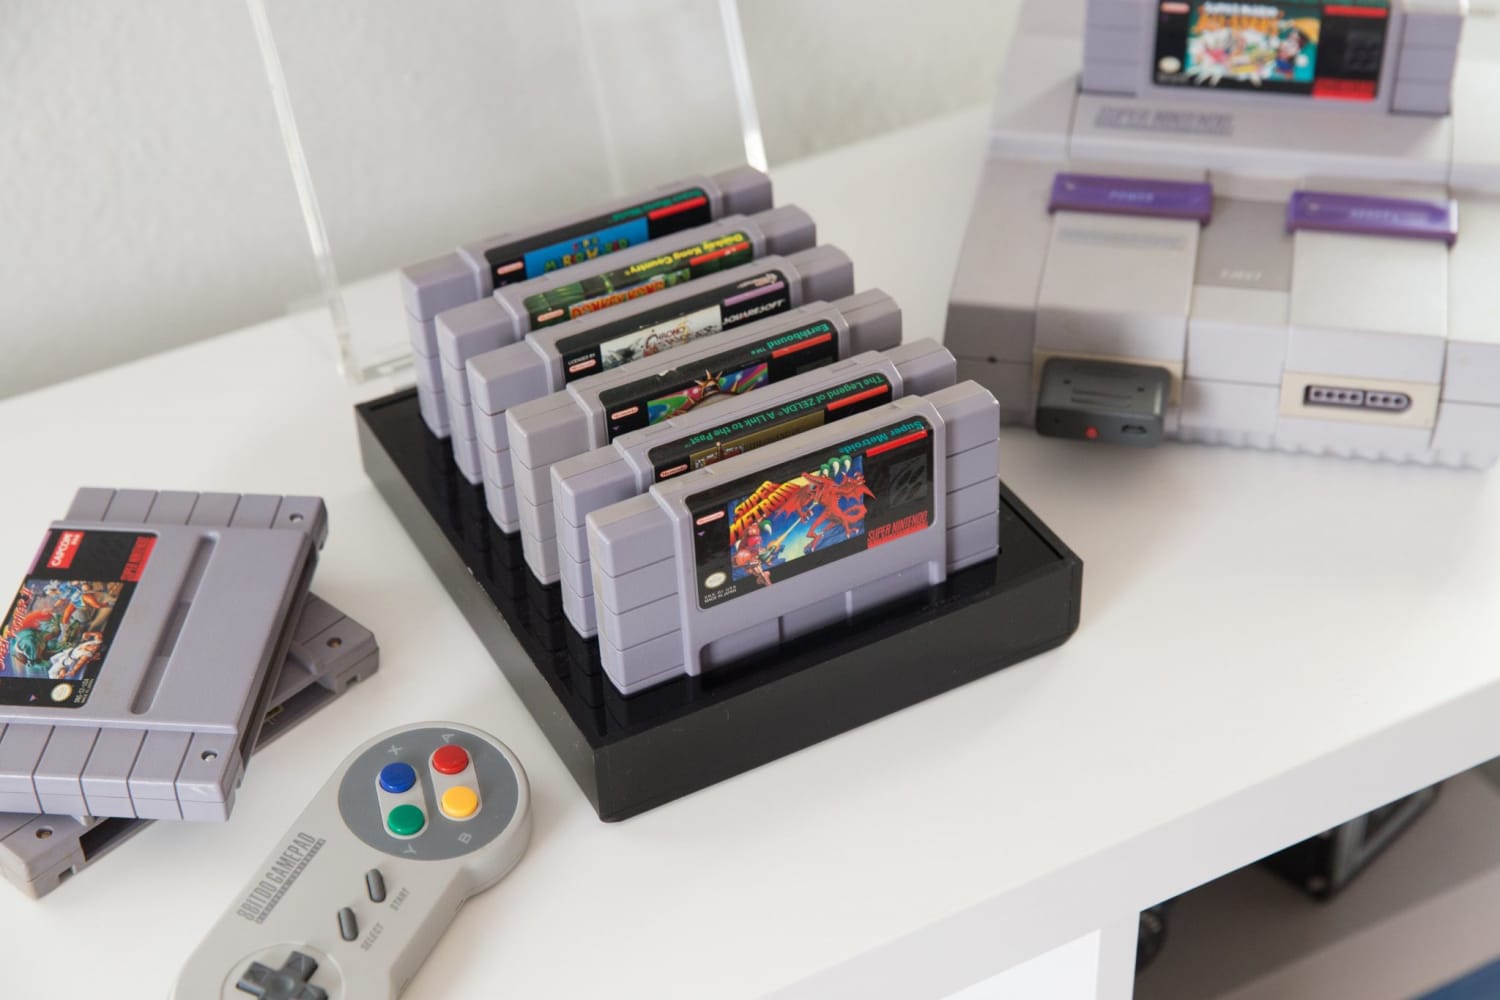 Best SNES Emulators for Android in 2020 - The Ultimate List